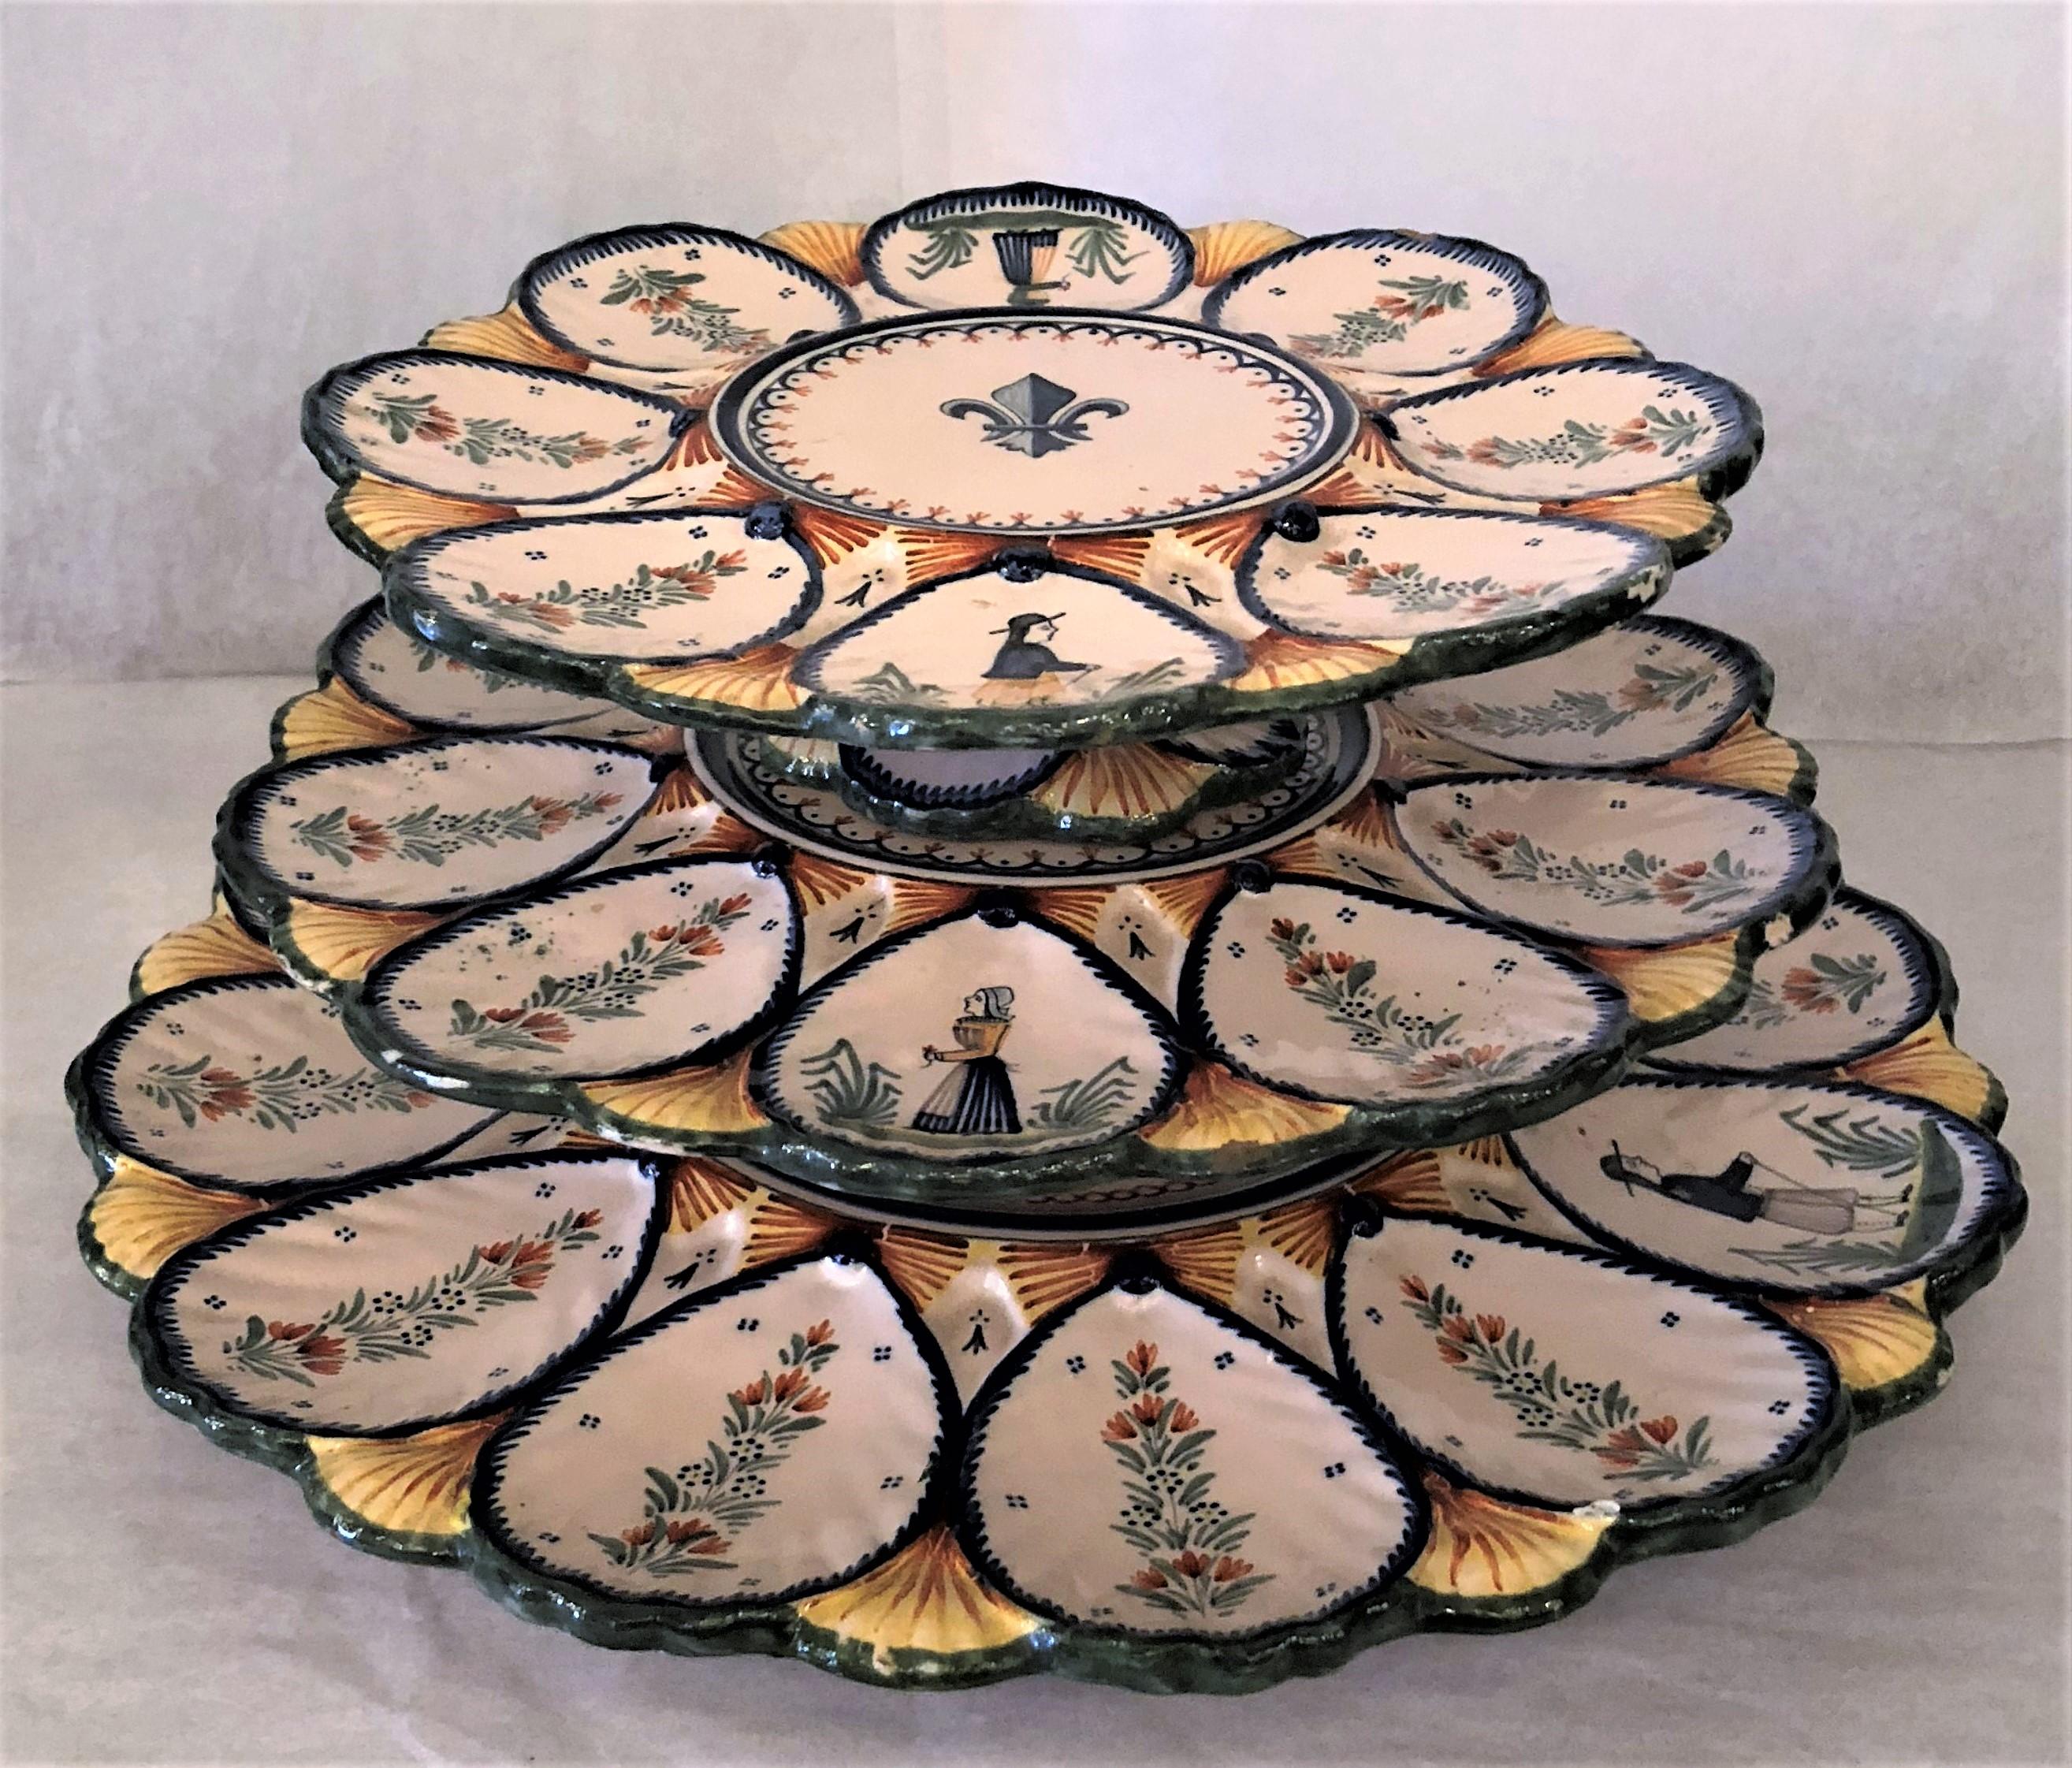 Estate French Faience 3-tiered oyster server, signed 'HR Quimper,' circa 1950.
Each of the 3 tiers are removable.